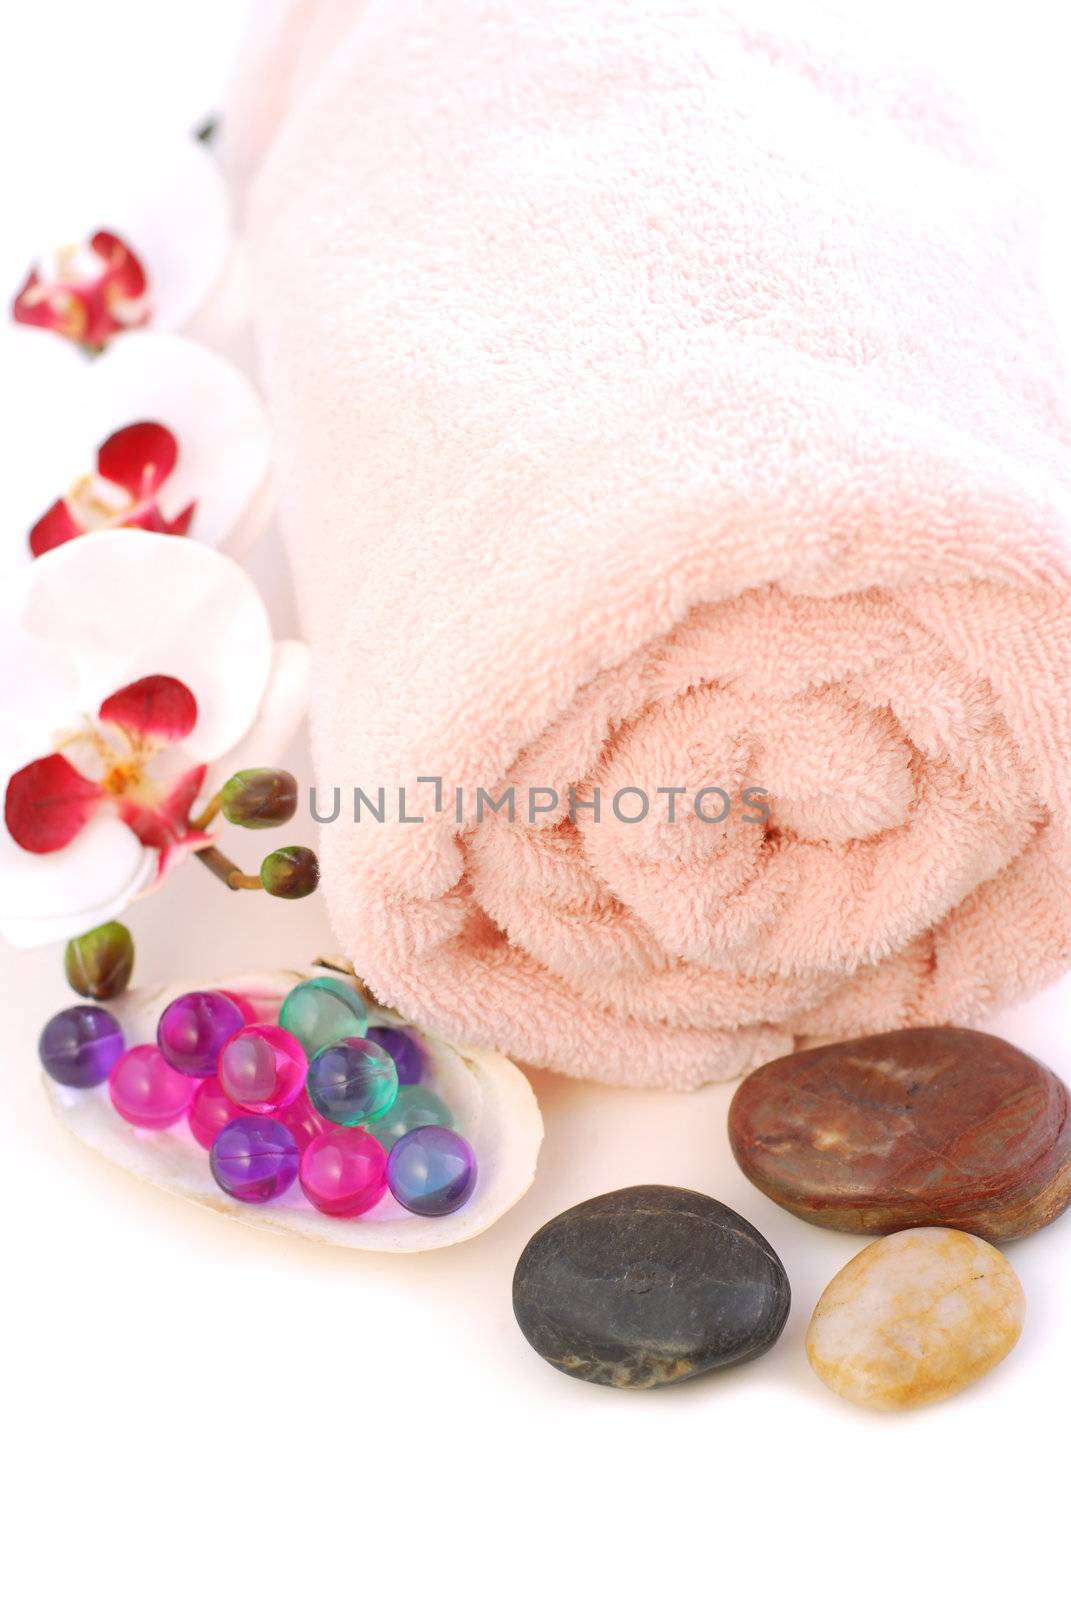 Pink rolled up towel with massage stones and bath beads on white background